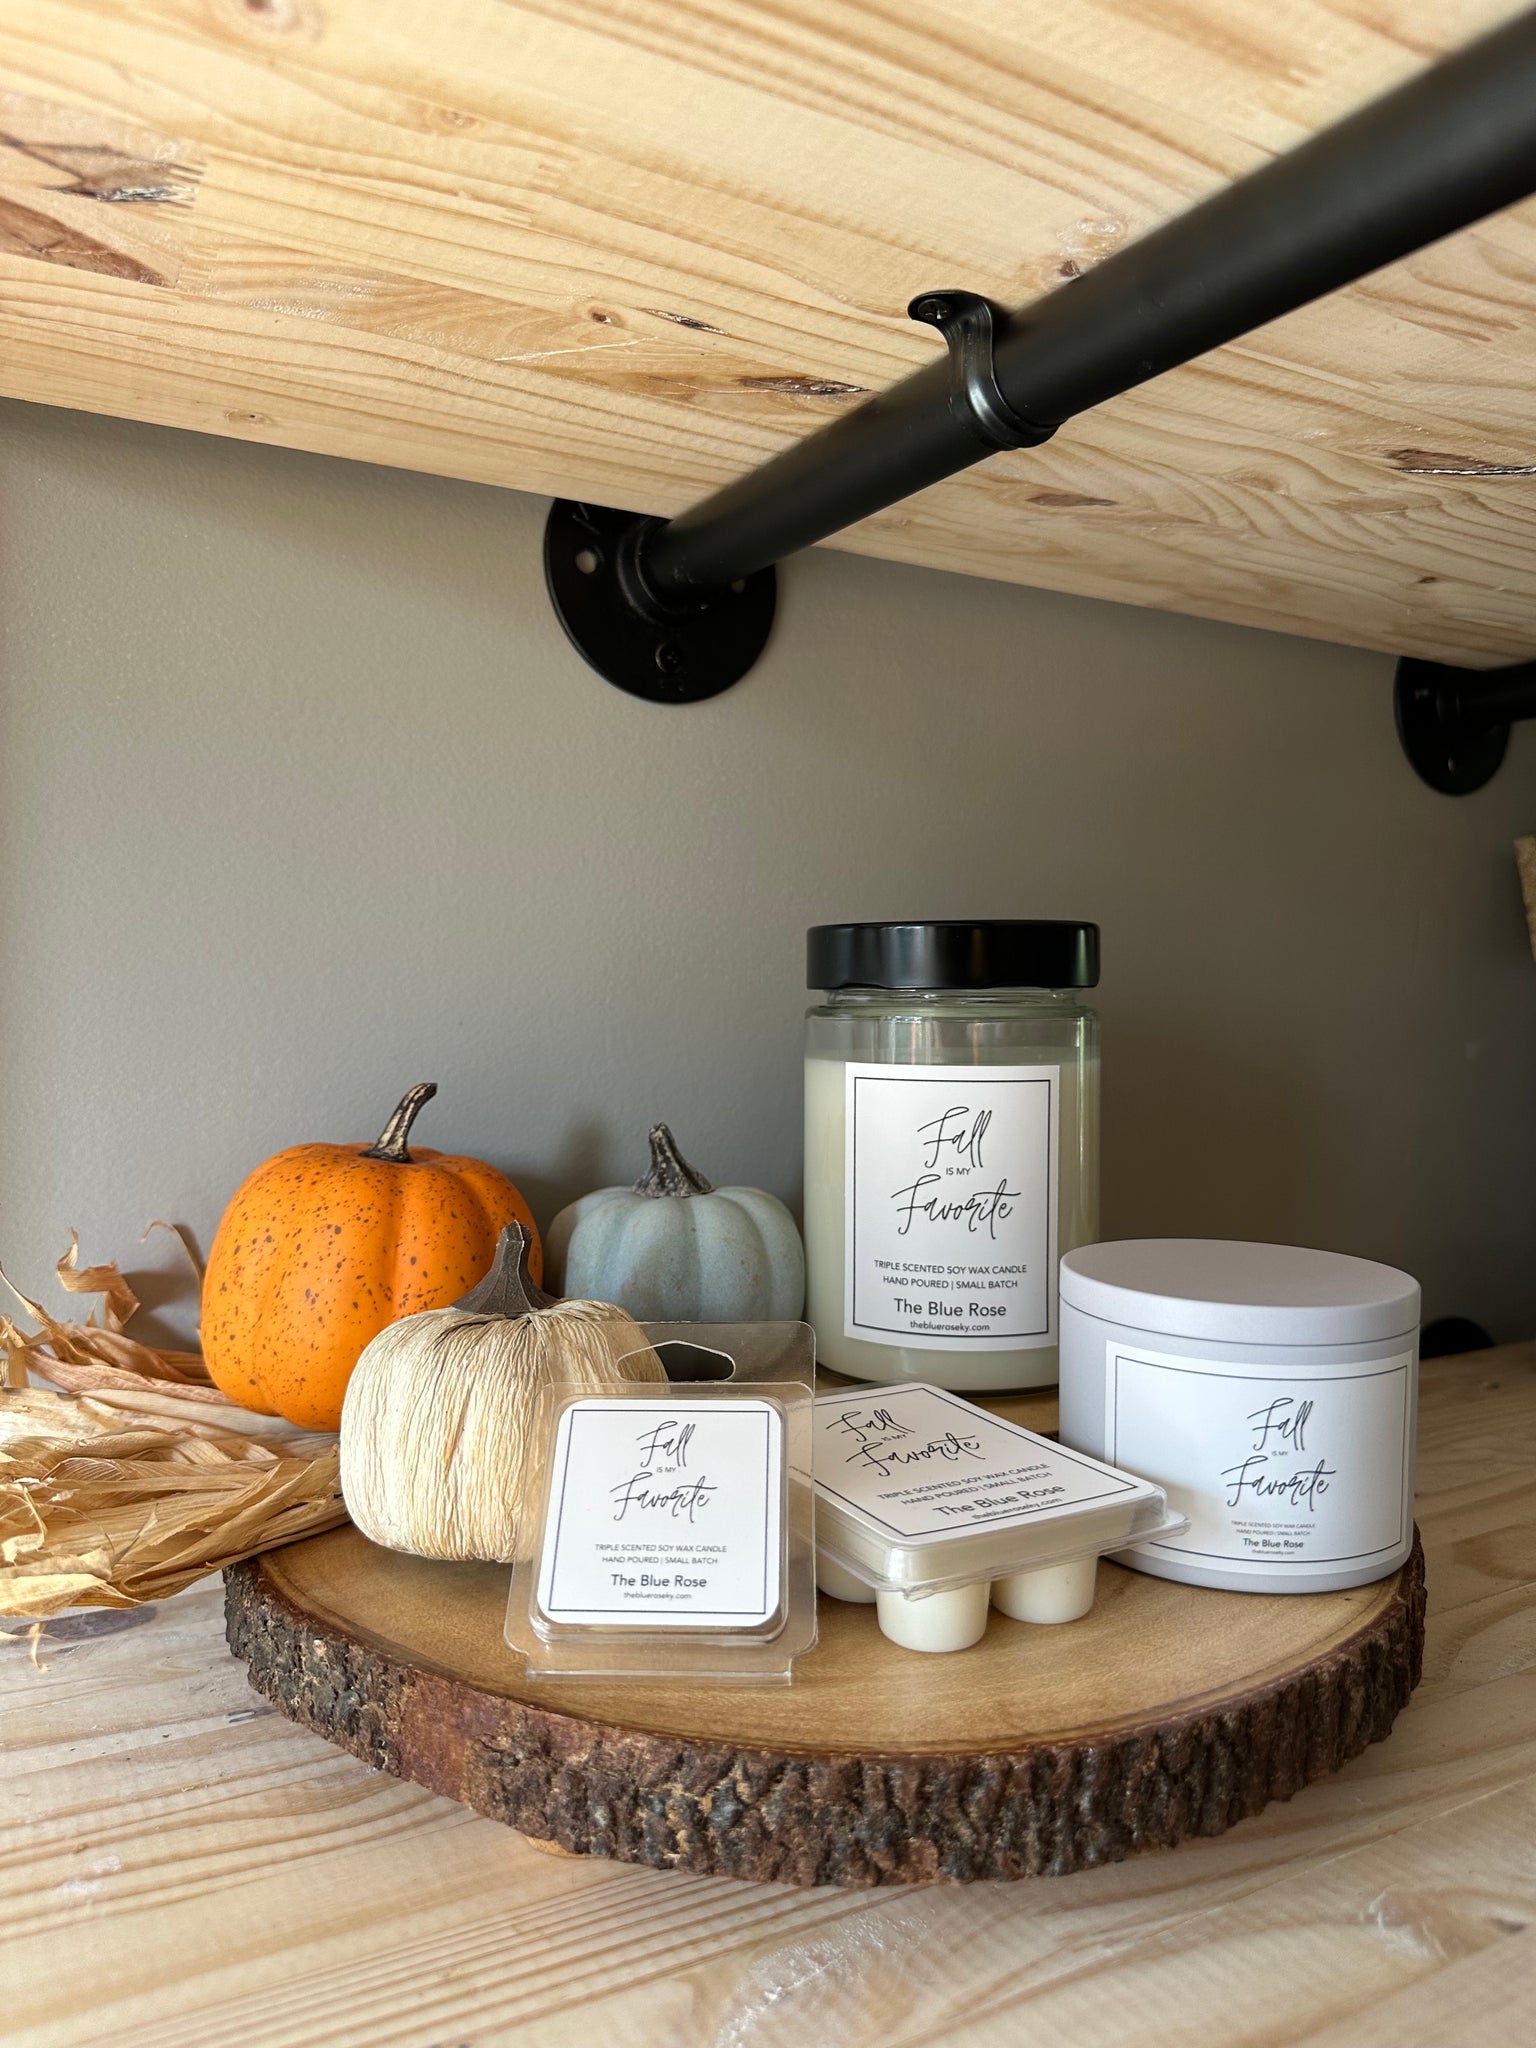 Fall is my Favorite Candle Collection - Jar Candle - Tin Candle - Wax Melts